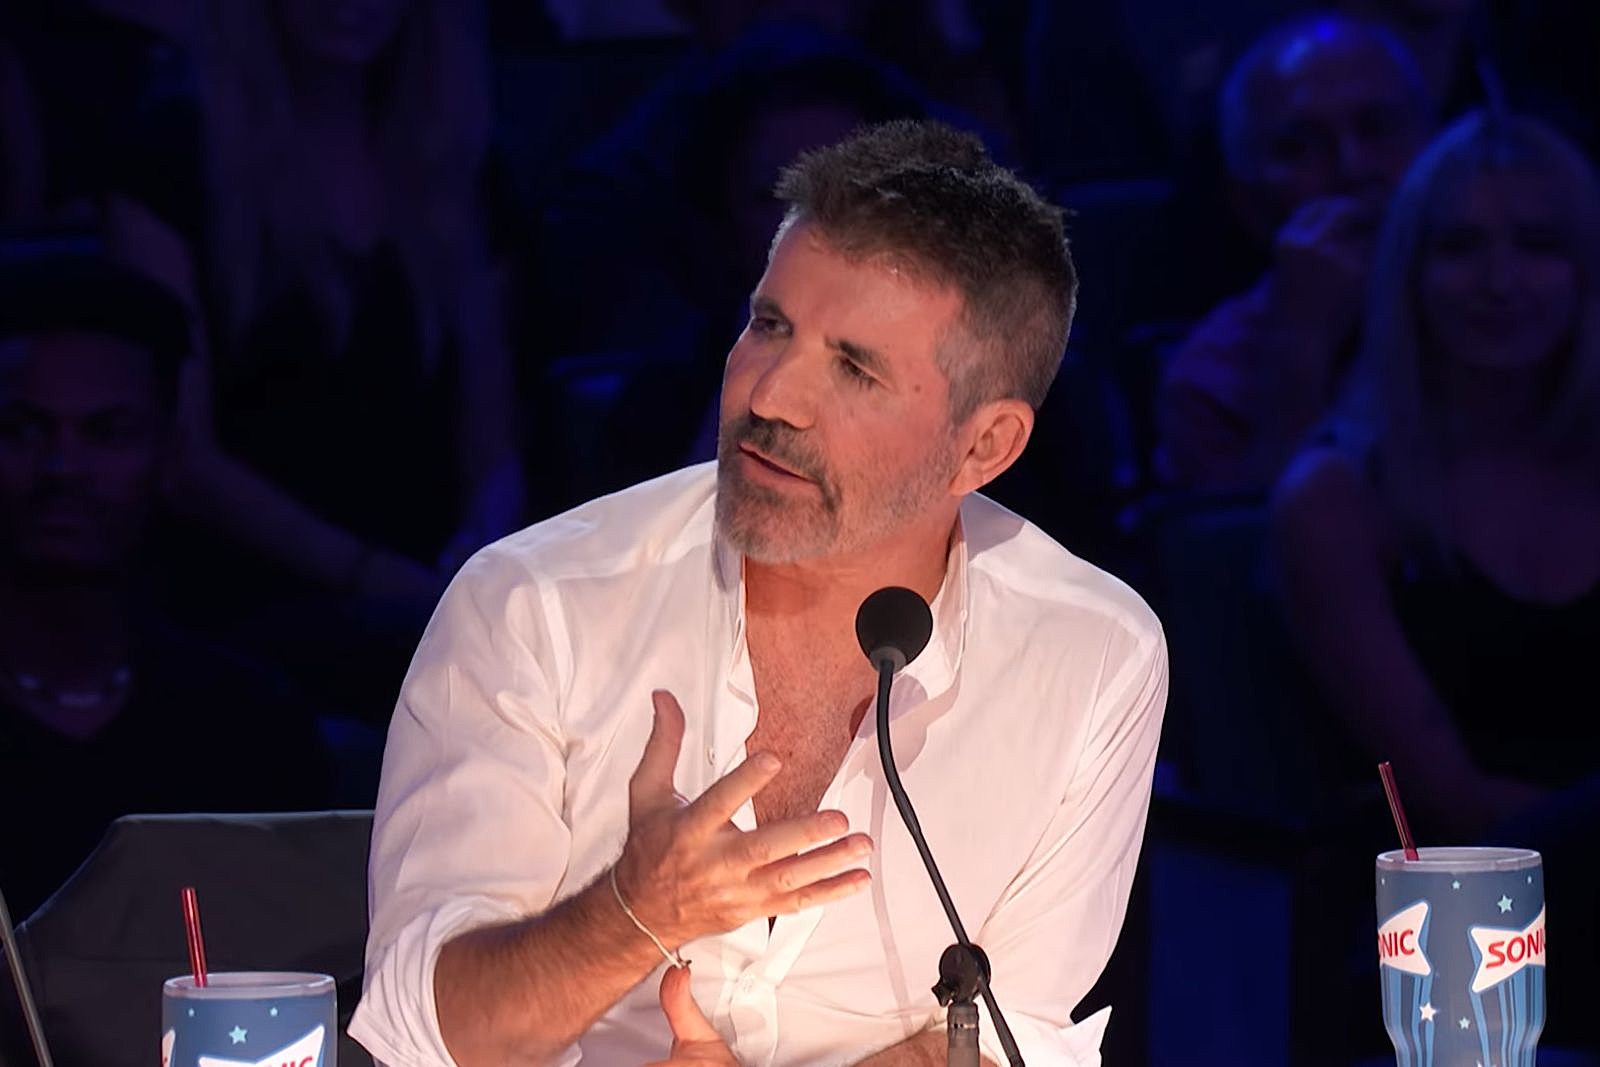 Simon Cowell (Photo: Maureen Langan's hilarious performance will leave you laughing! - Qualifiers - AGT - 2023, America's Got Talent on YouTube)